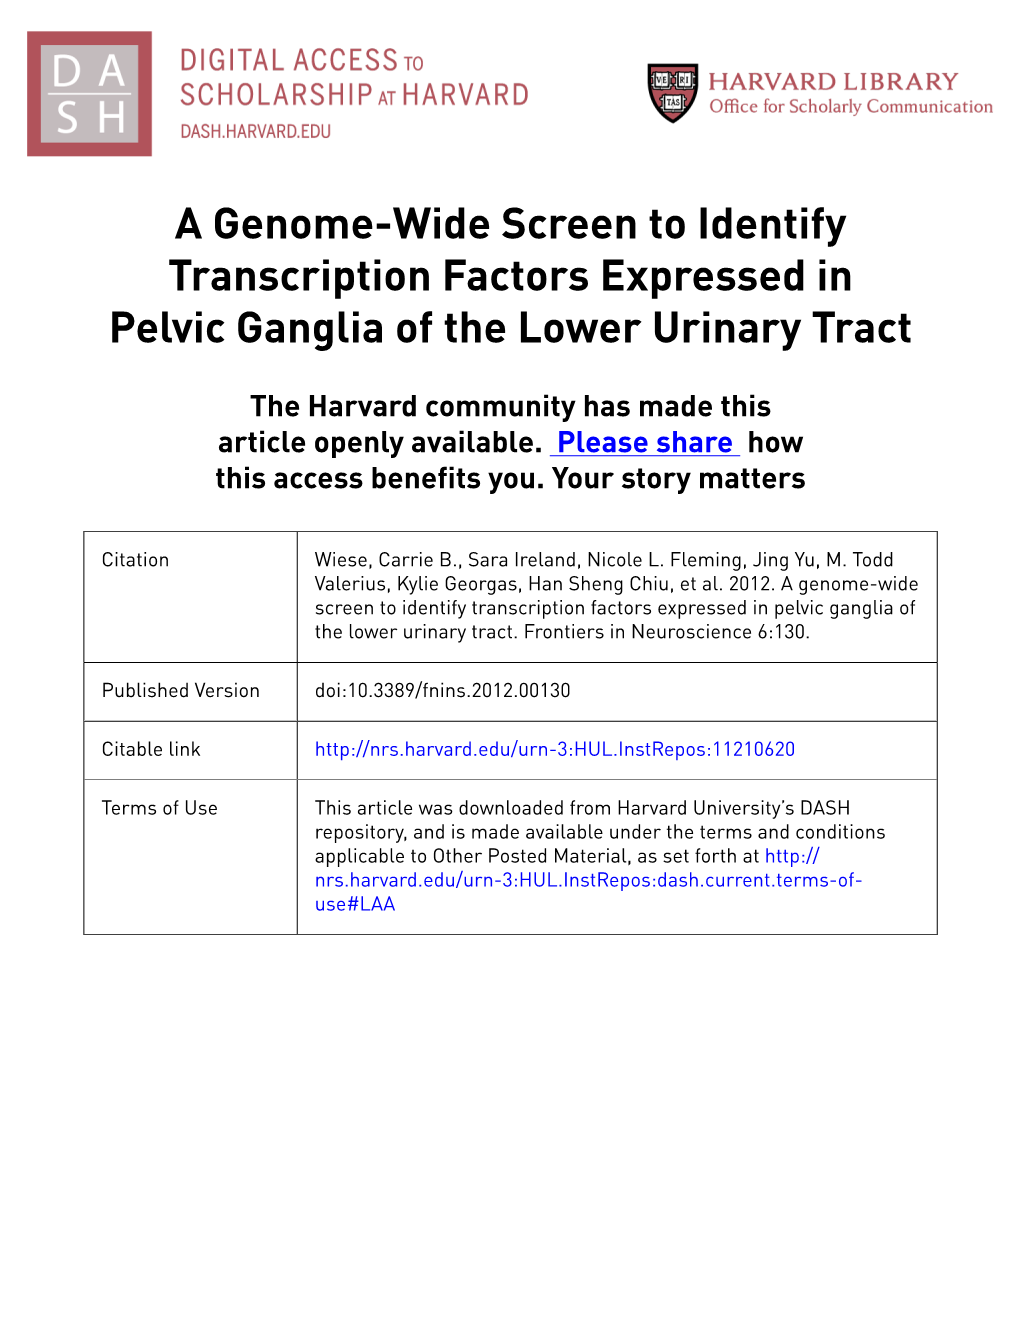 A Genome-Wide Screen to Identify Transcription Factors Expressed in Pelvic Ganglia of the Lower Urinary Tract